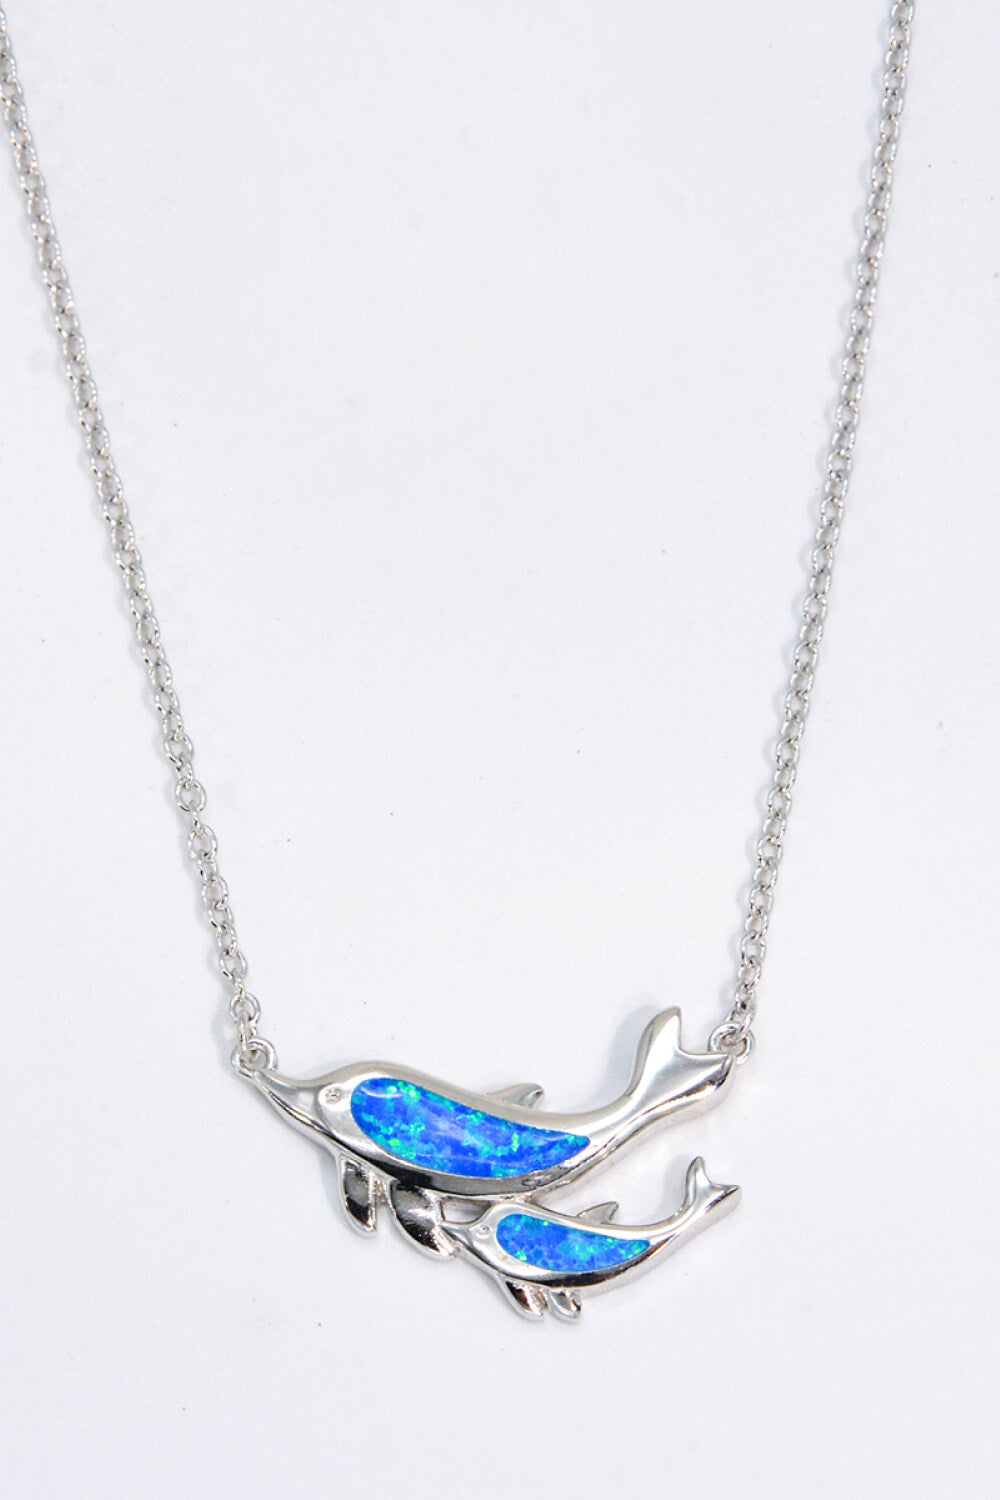 Opal Dolphin Chain-Link Necklace-Necklaces-Inspired by Justeen-Women's Clothing Boutique in Chicago, Illinois